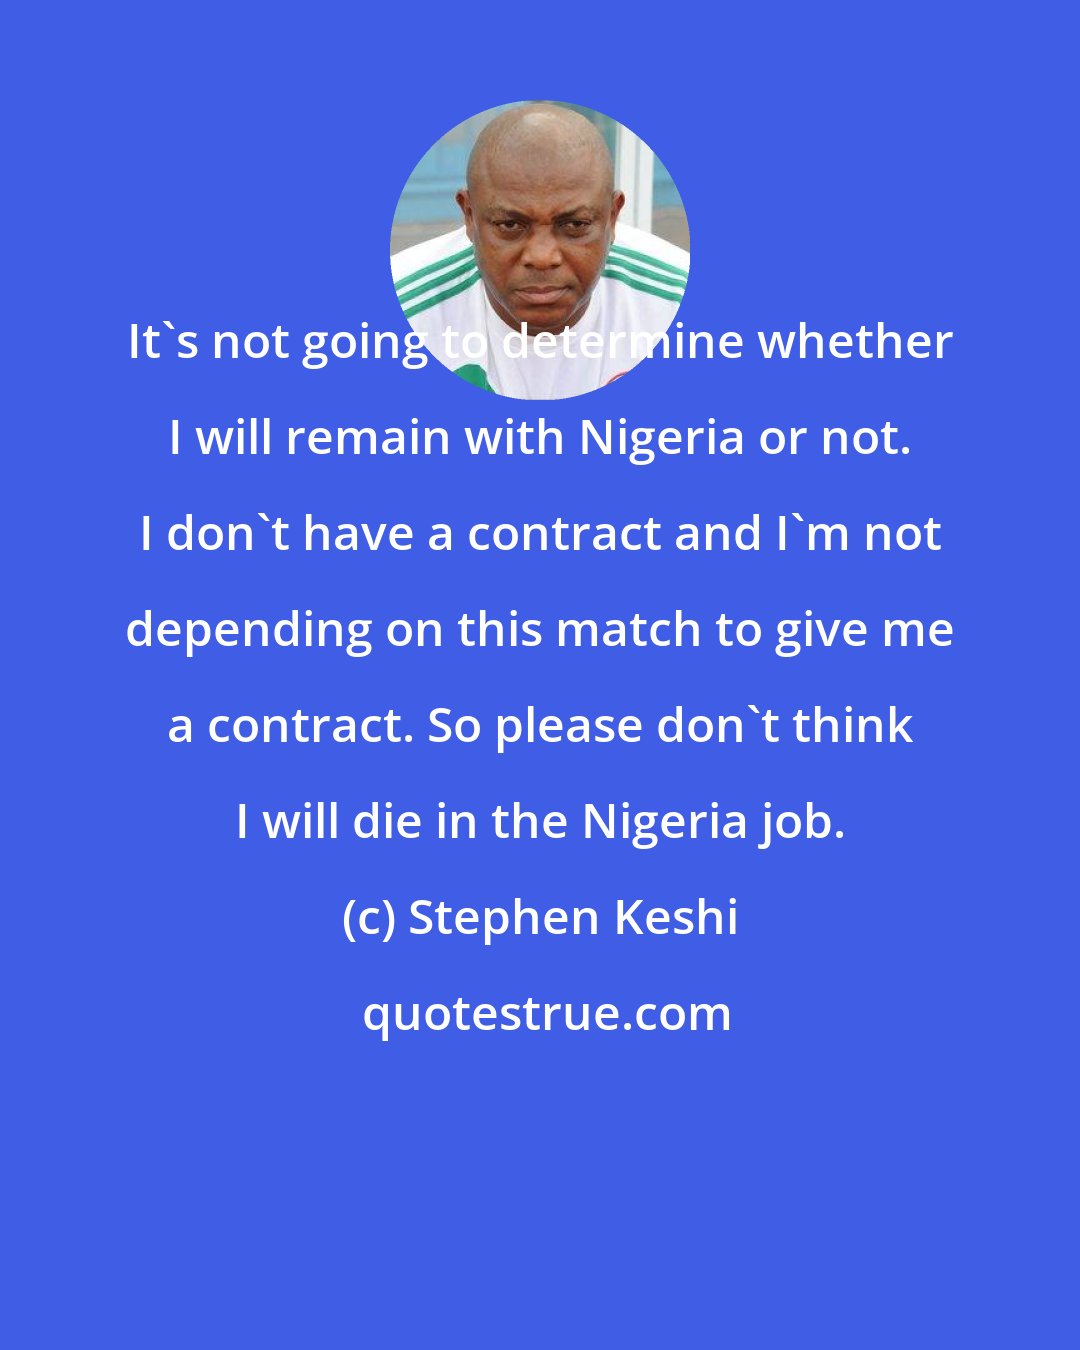 Stephen Keshi: It's not going to determine whether I will remain with Nigeria or not. I don't have a contract and I'm not depending on this match to give me a contract. So please don't think I will die in the Nigeria job.